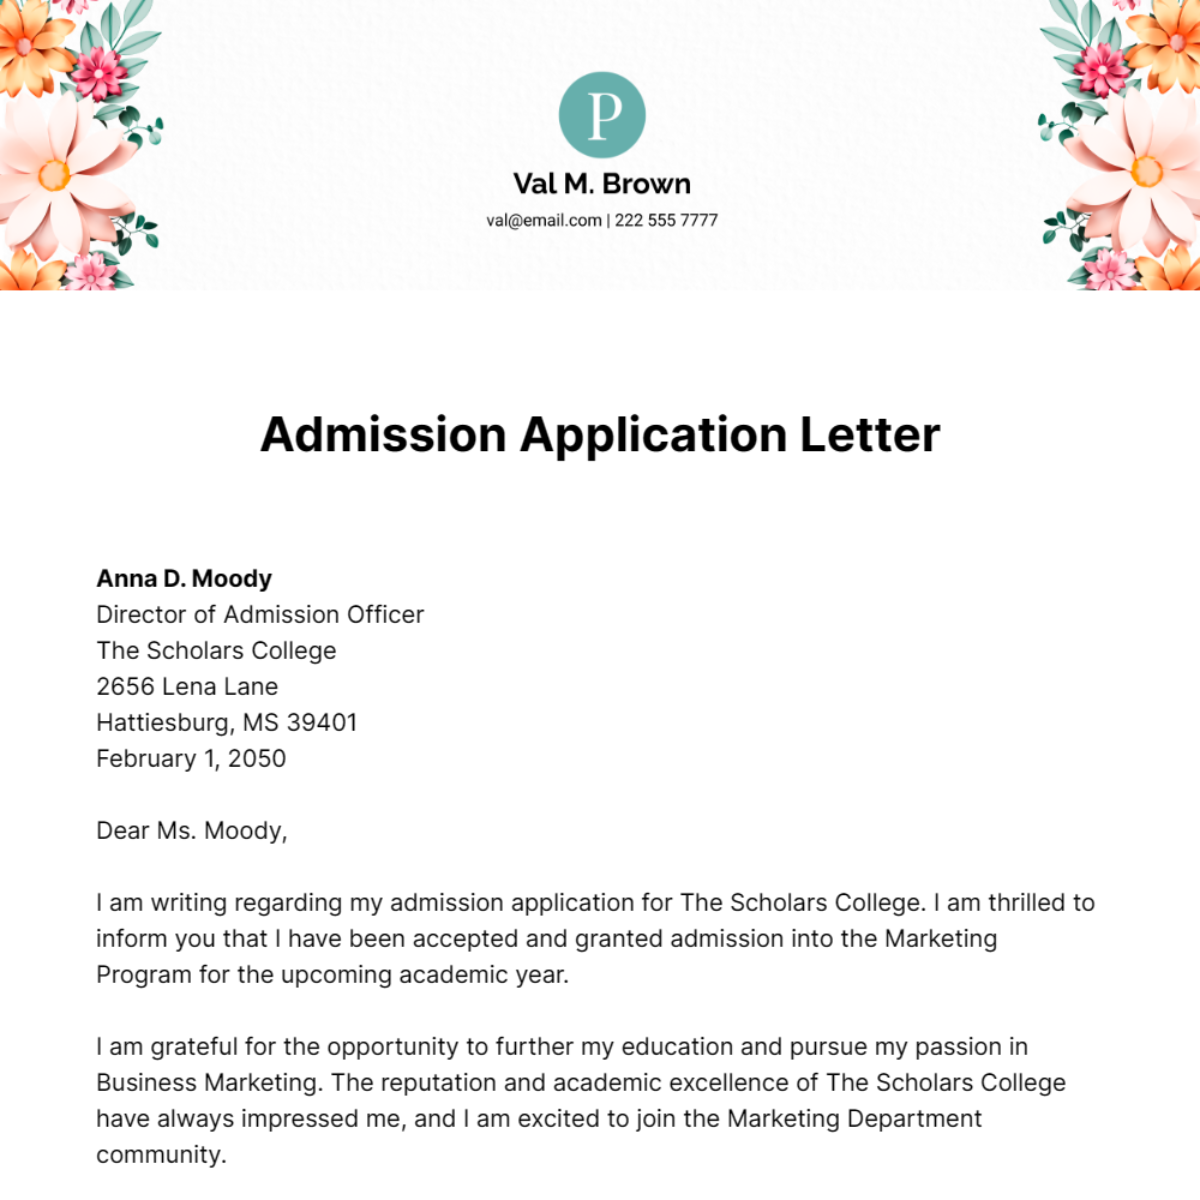 Admission Application Letter Template